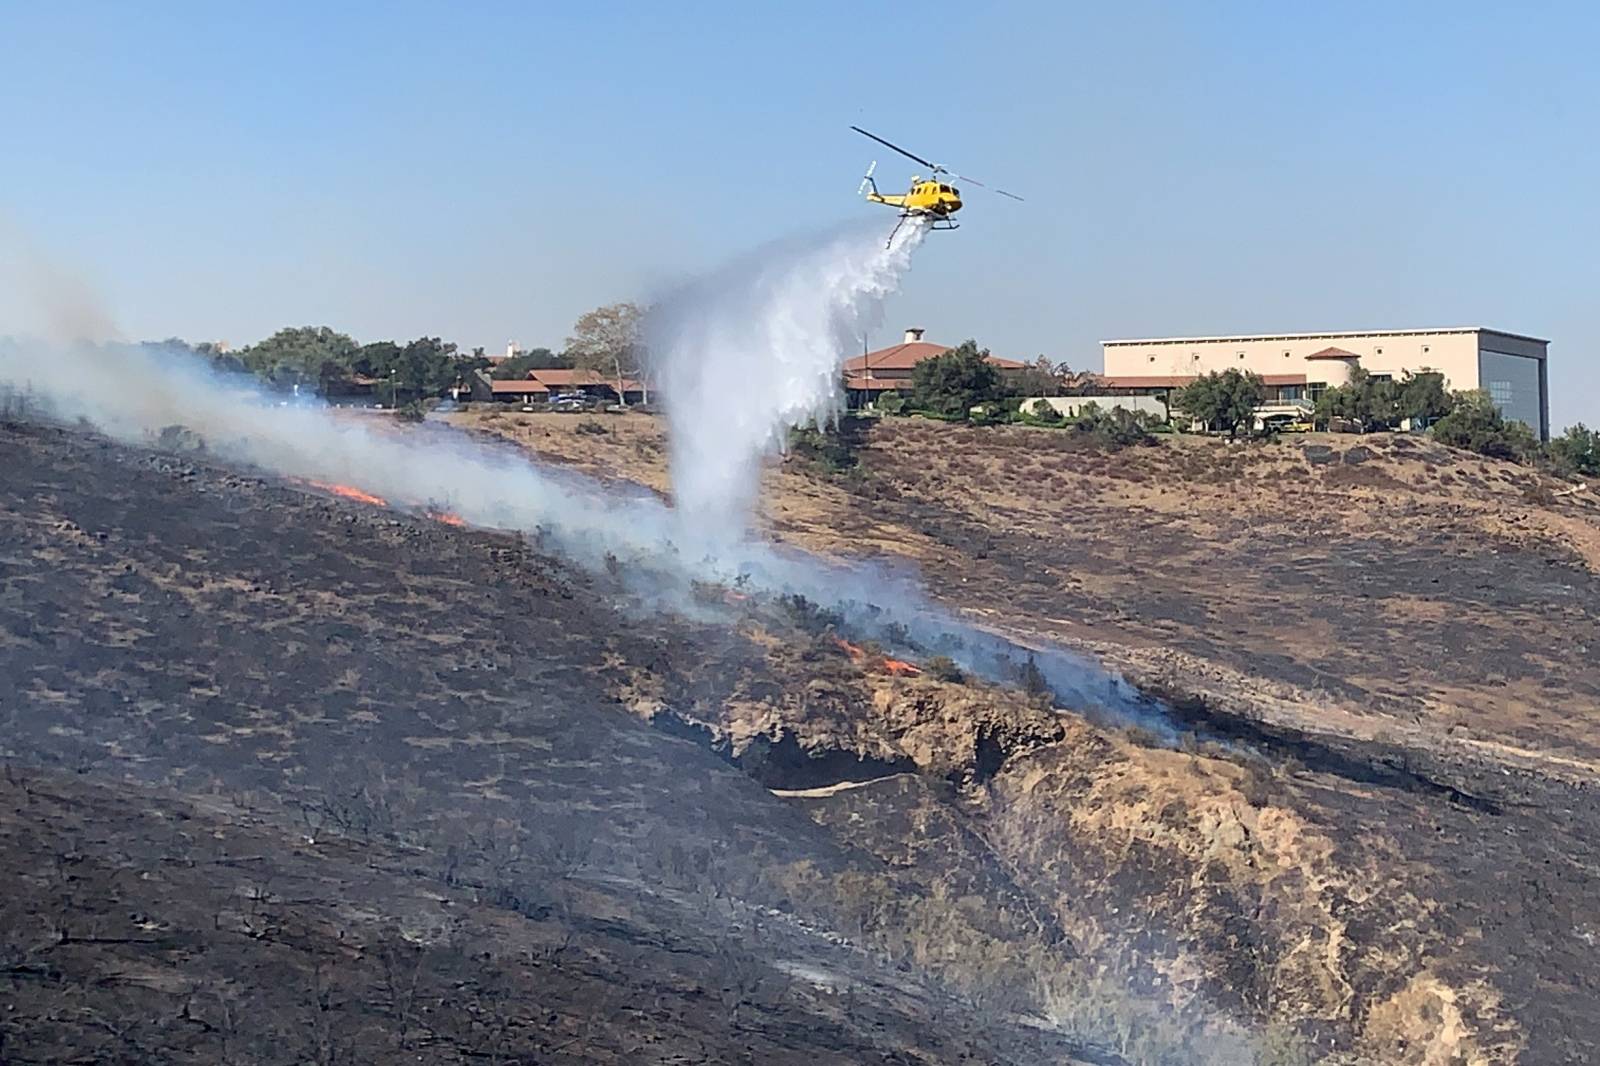 Helicopter drops water on a fire burning on a hillside near the Reagan Presidential library in Simi Valley